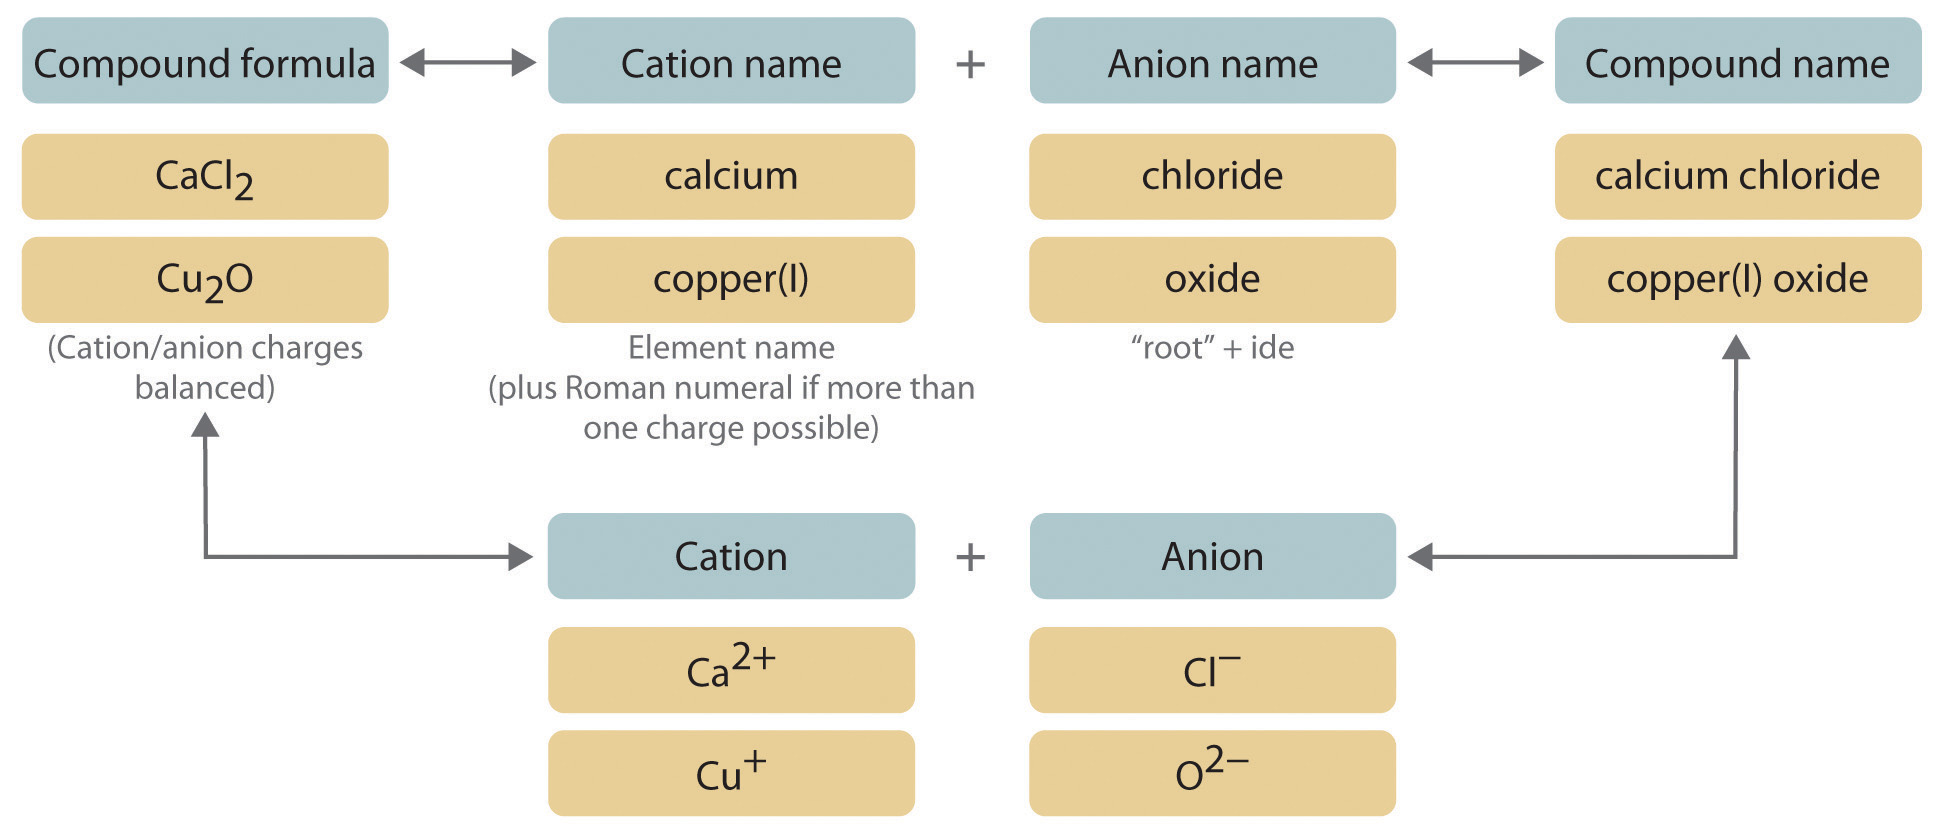 Chemical Formulas And Names Of Ionic Compounds Answers